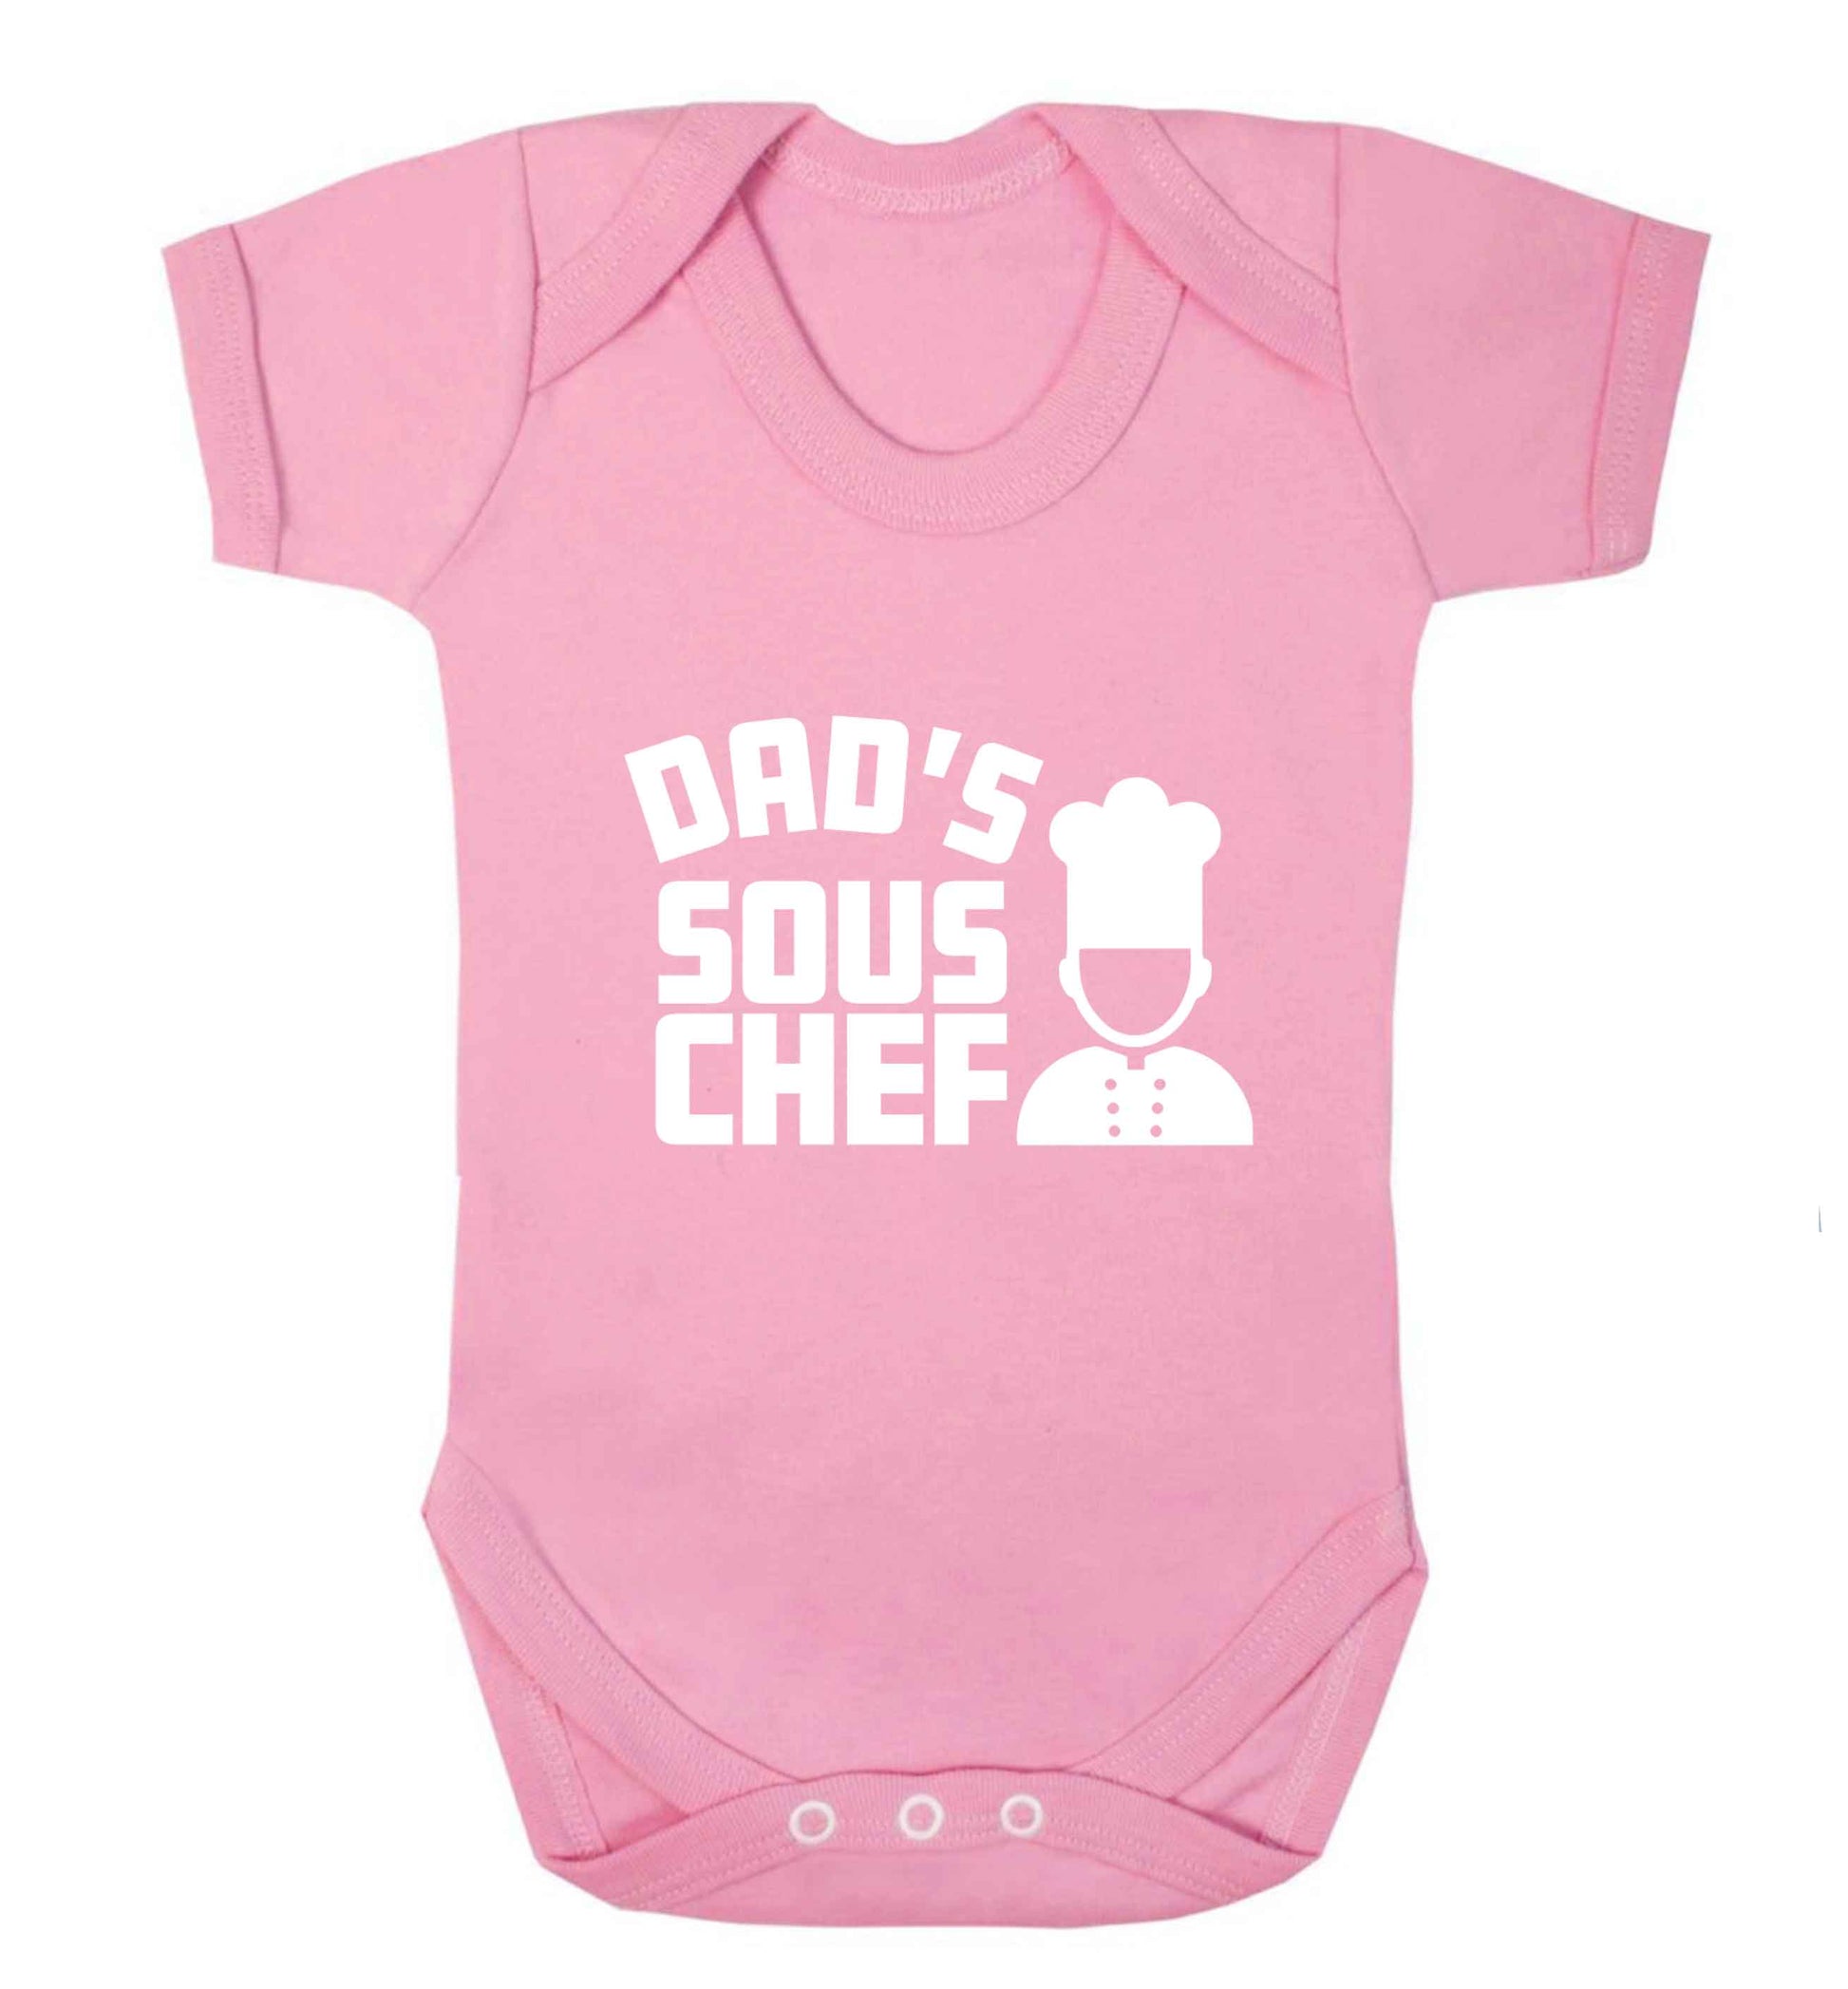 Dad's sous chef baby vest pale pink 18-24 months